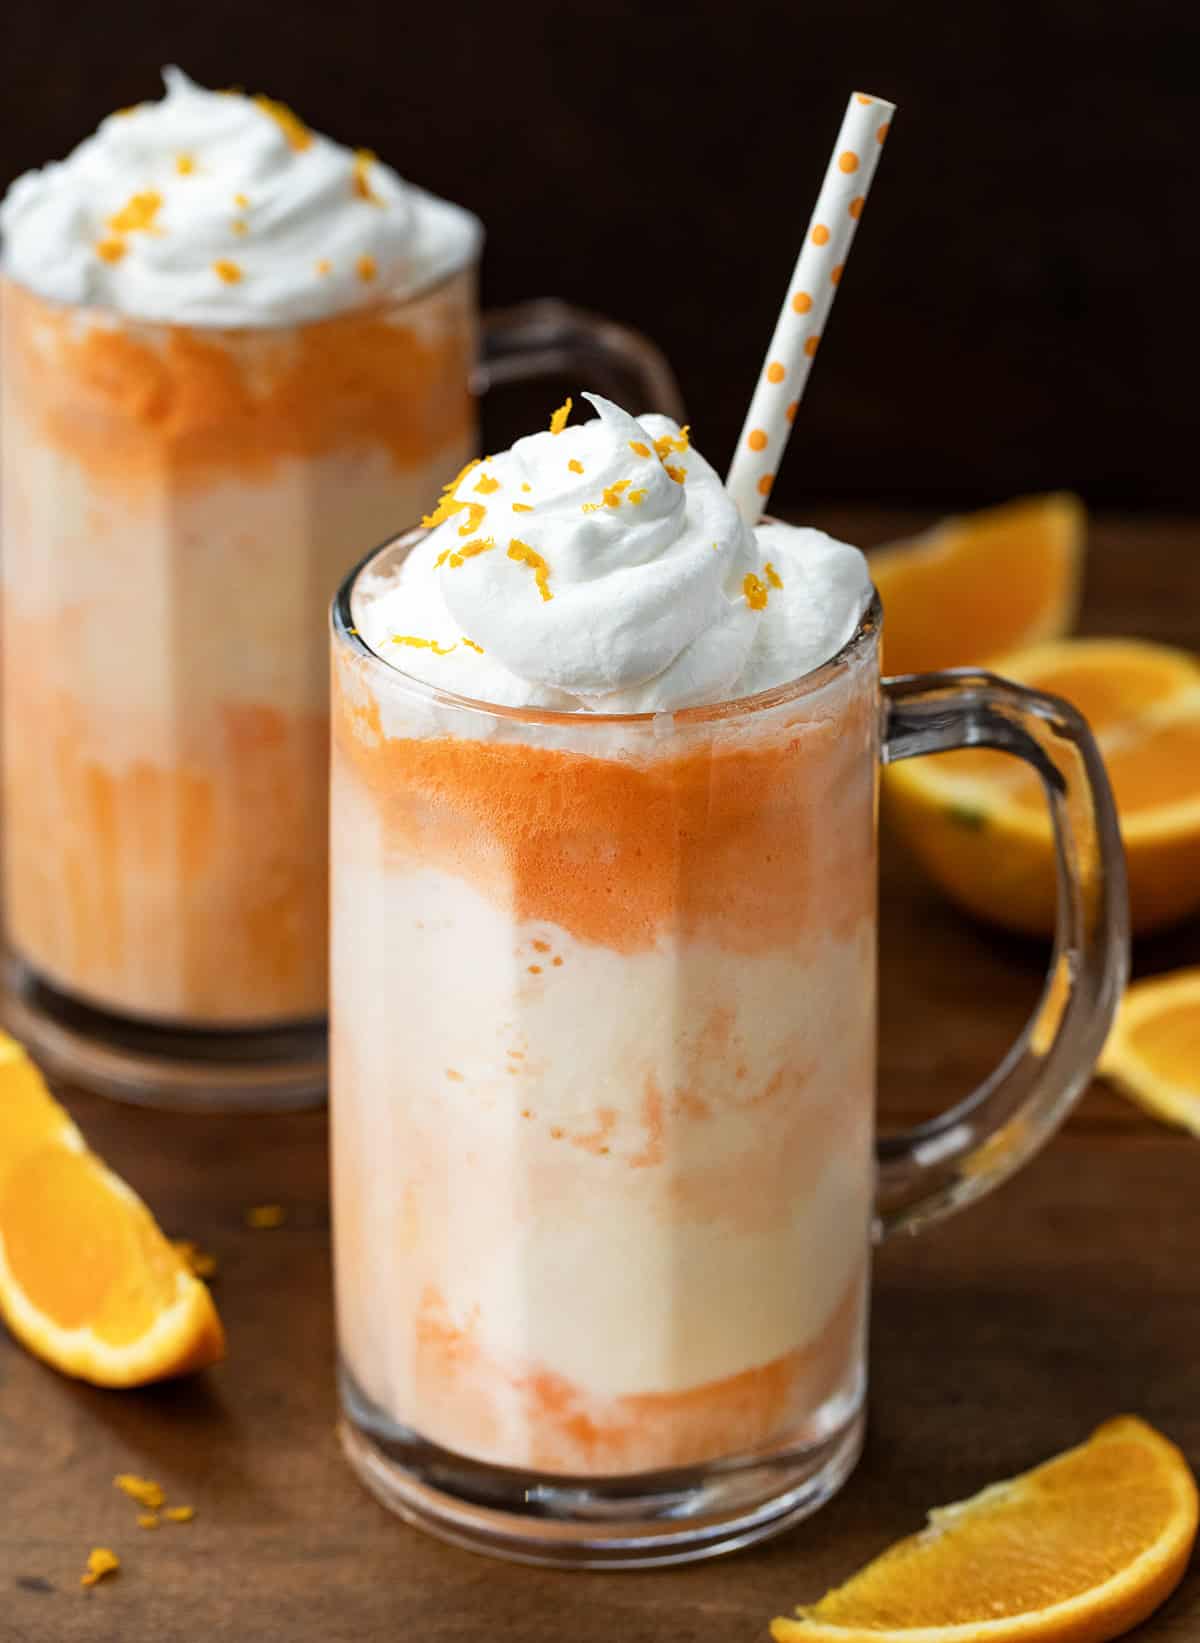 Two Dirty Creamsicle Floats on a wooden table with fresh orange slices around.